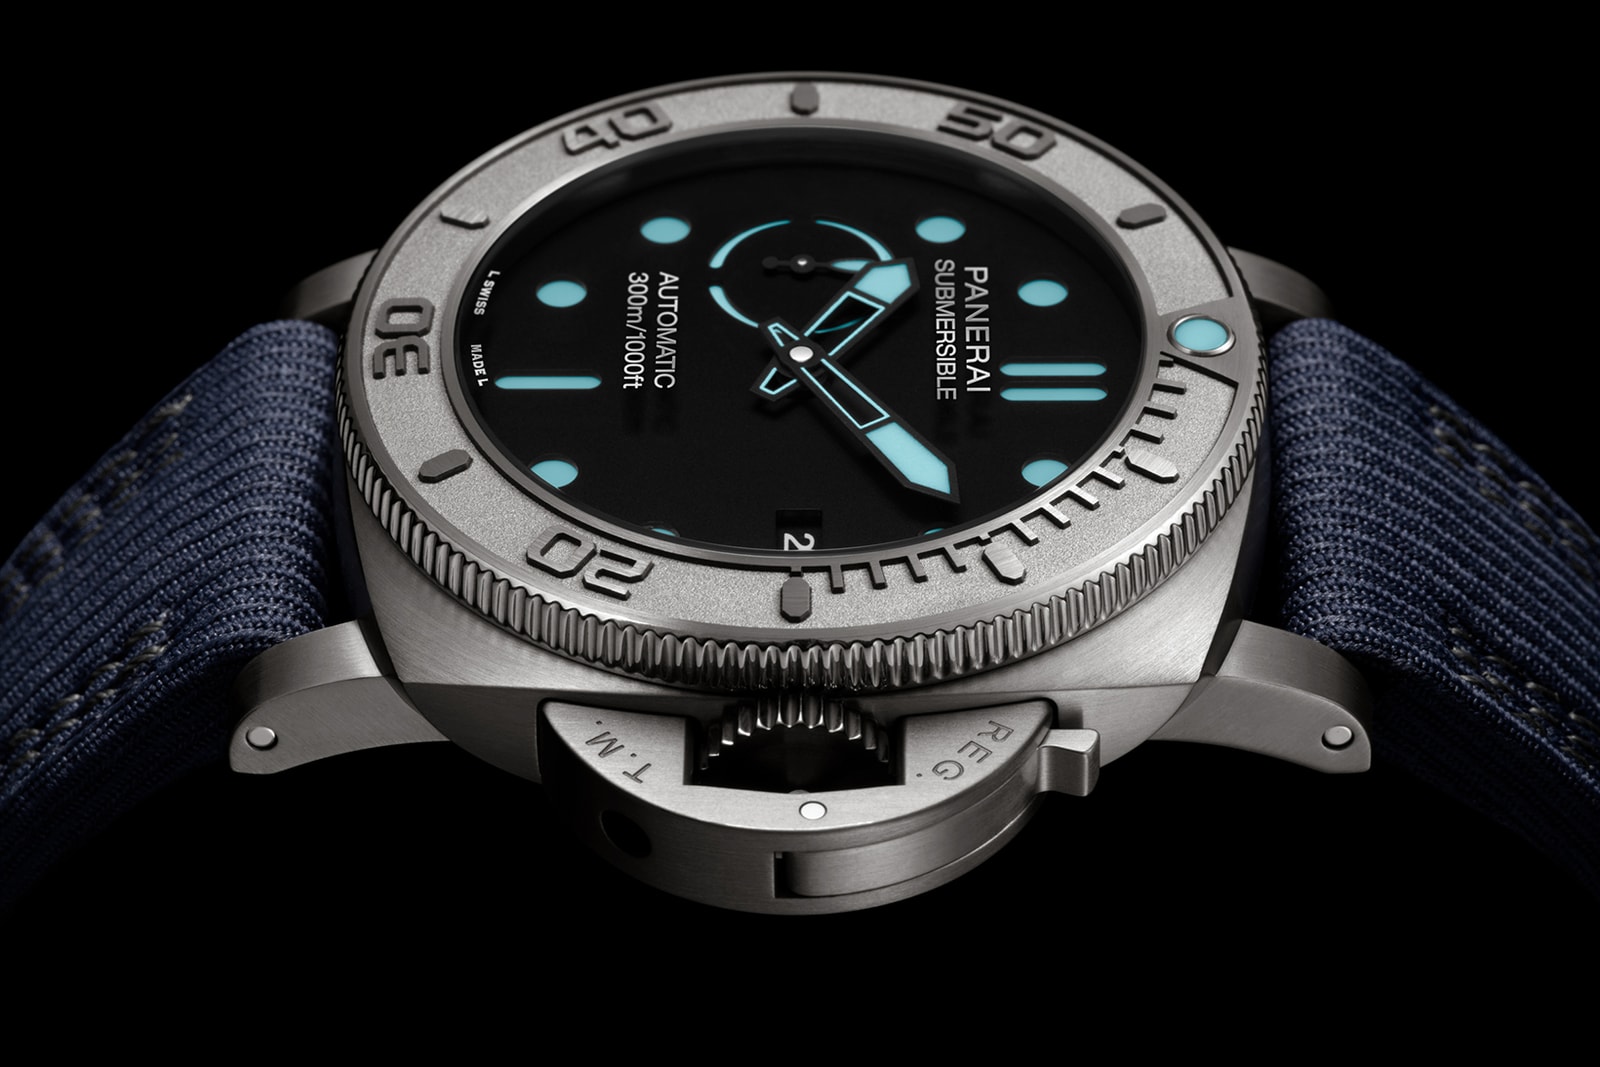 Panerai SIHH Luna Rossa Exclusive Watch Collection | Hypebeast